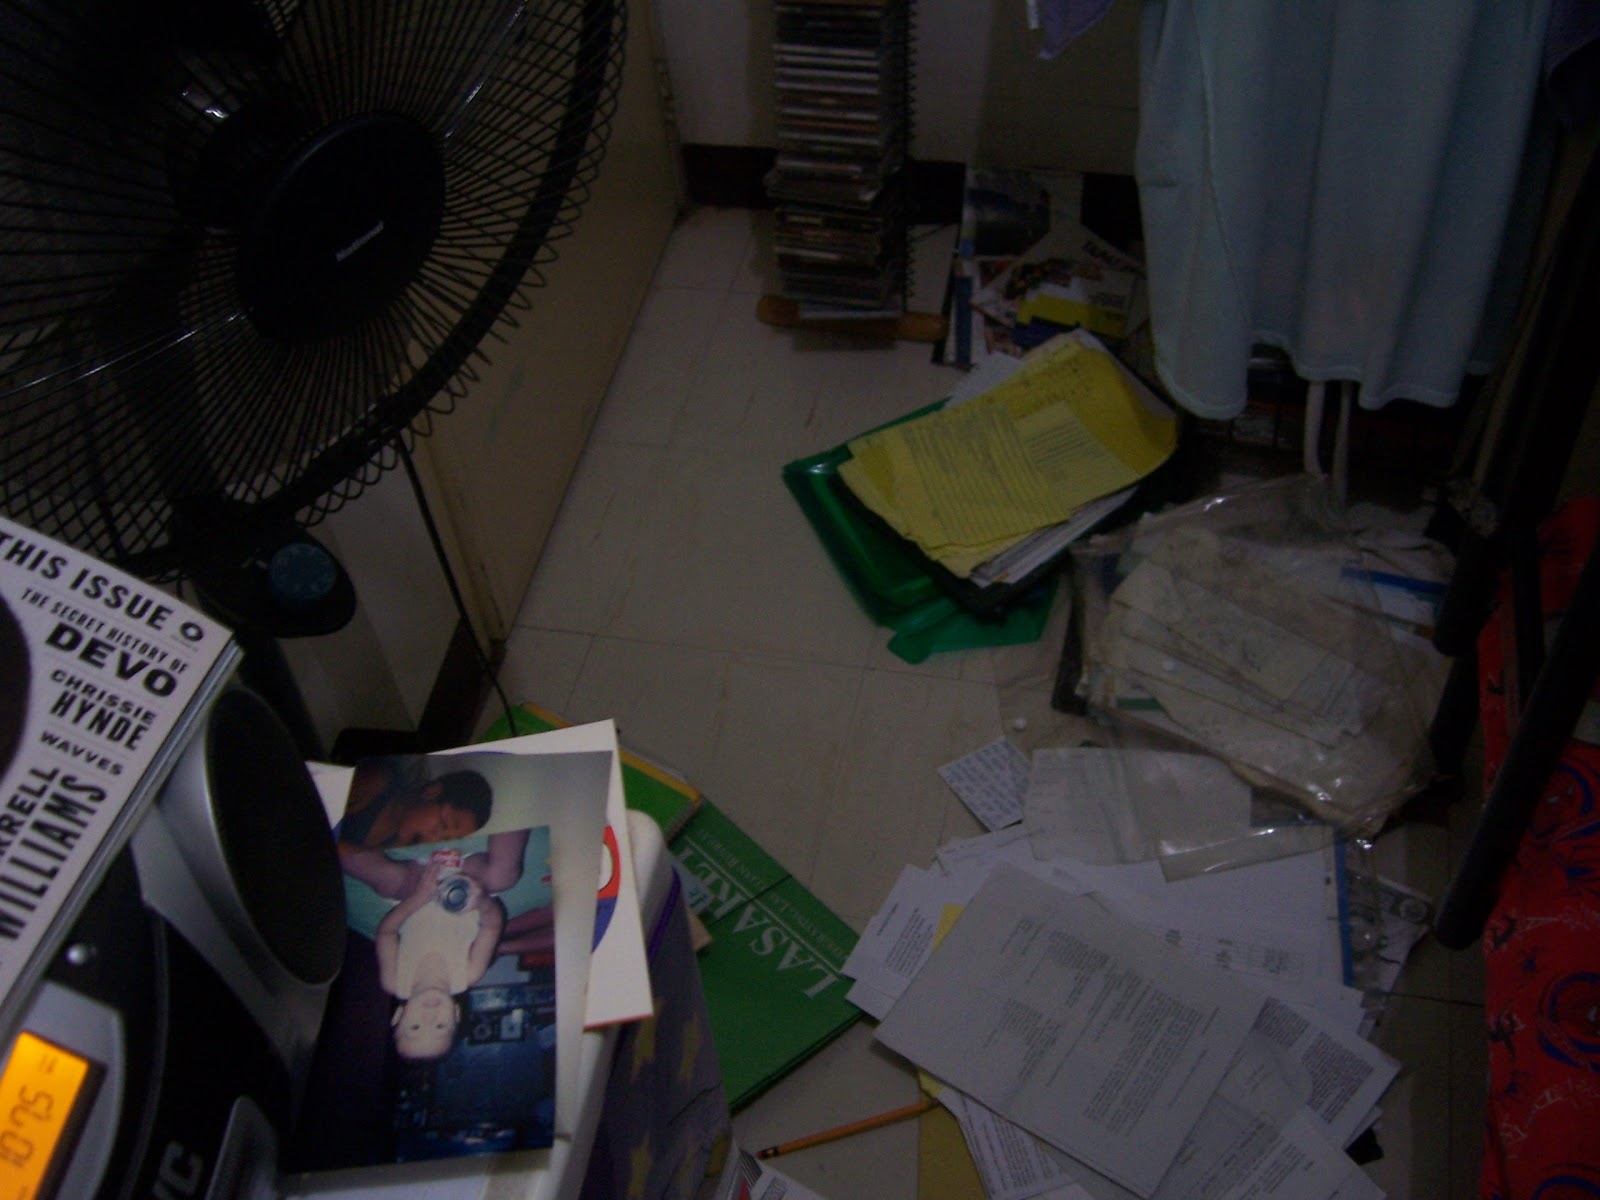 Friday night in my bedroom, with papers and whatnot from seven years of high school and college sorted out on the floor. And the electric fan, and the radio, and my sister's stuff.